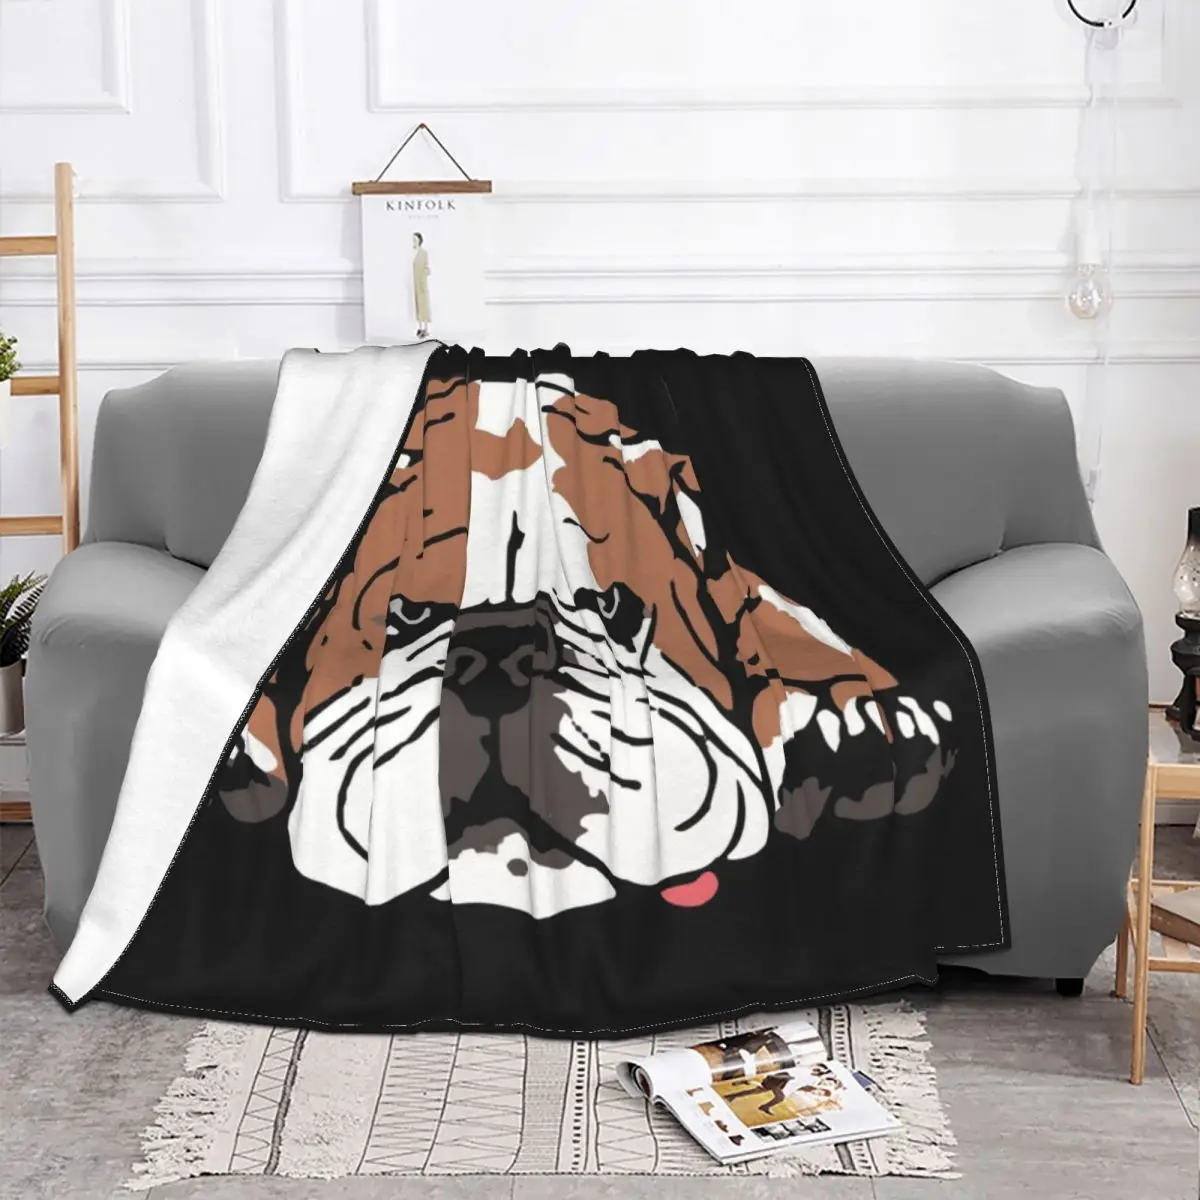 

English Bulldog Awesome Funny Bulldog Dog Blankets Coral Fleece Winter Lightweight Thin Throw Blanket for Home Office Rug Piece